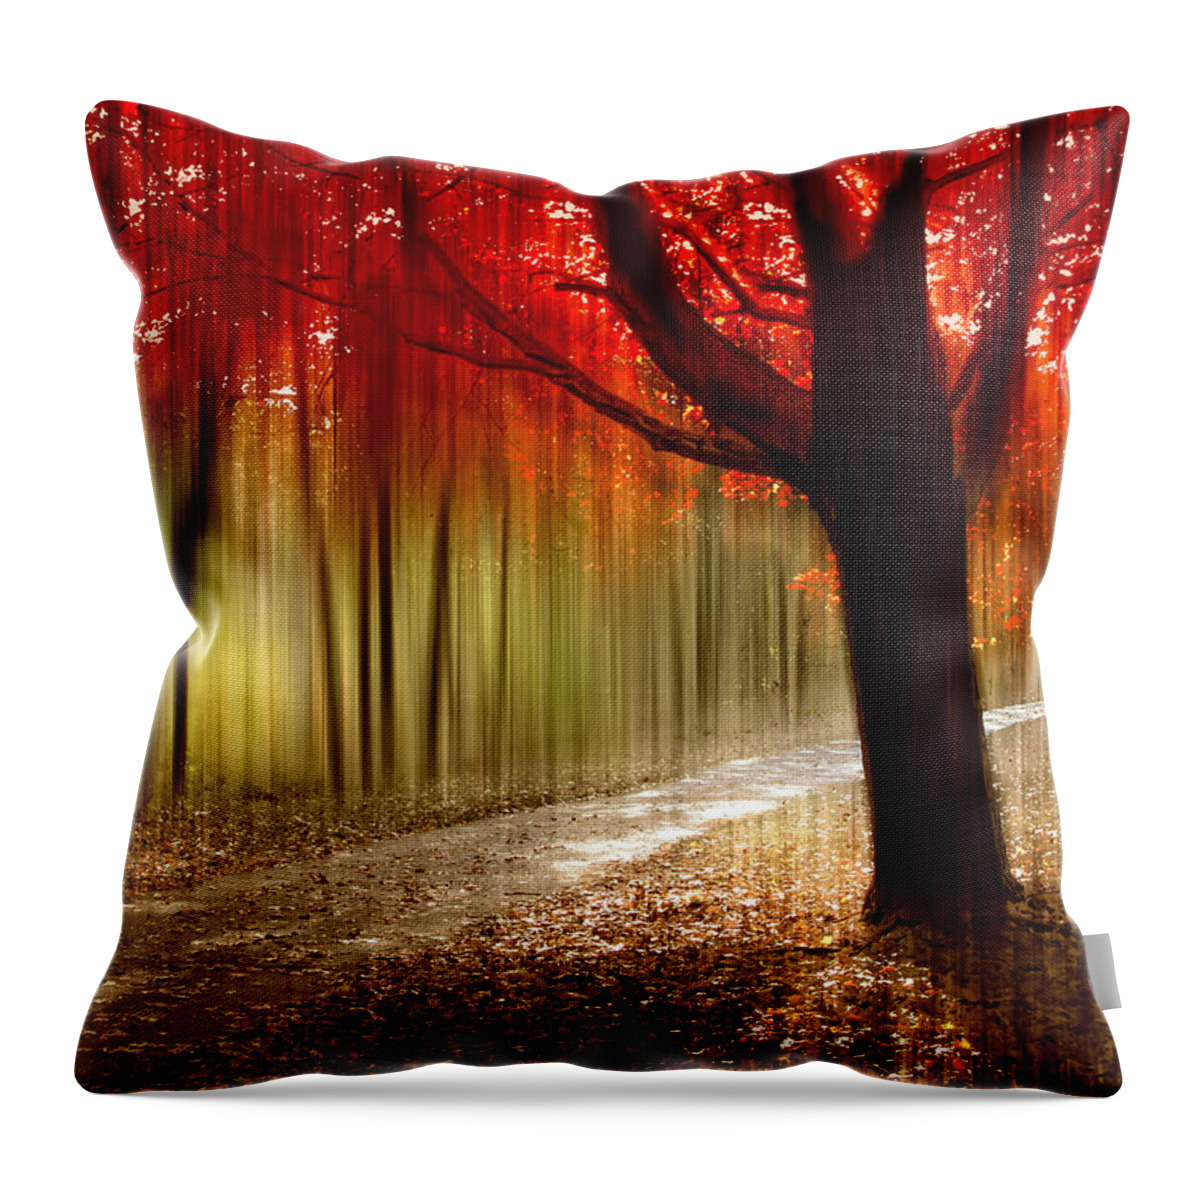 Autumn Throw Pillow featuring the photograph Painted With Light by Jessica Jenney